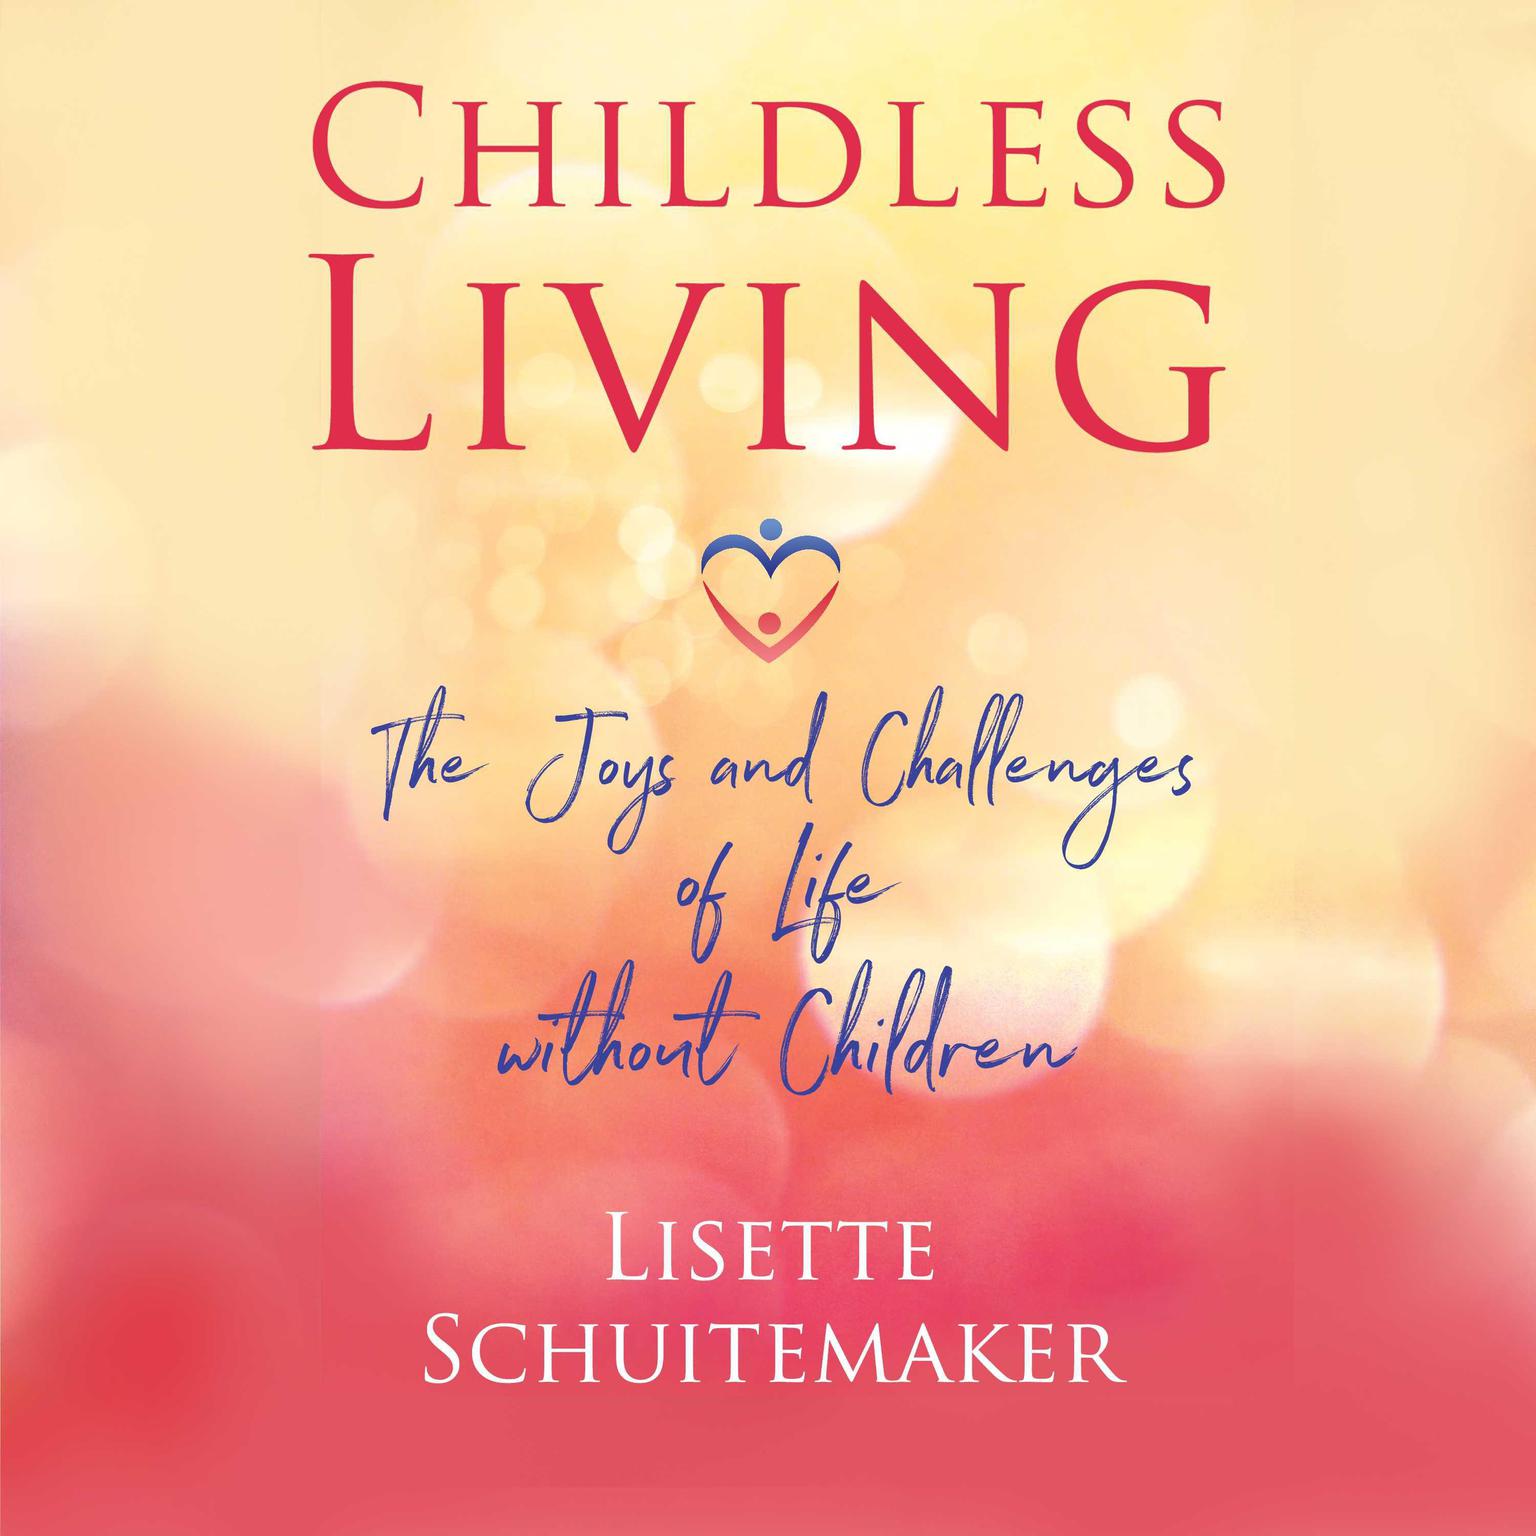 Childless Living: The Joys and Challenges of Life without Children Audiobook, by Lisette Schuitemaker